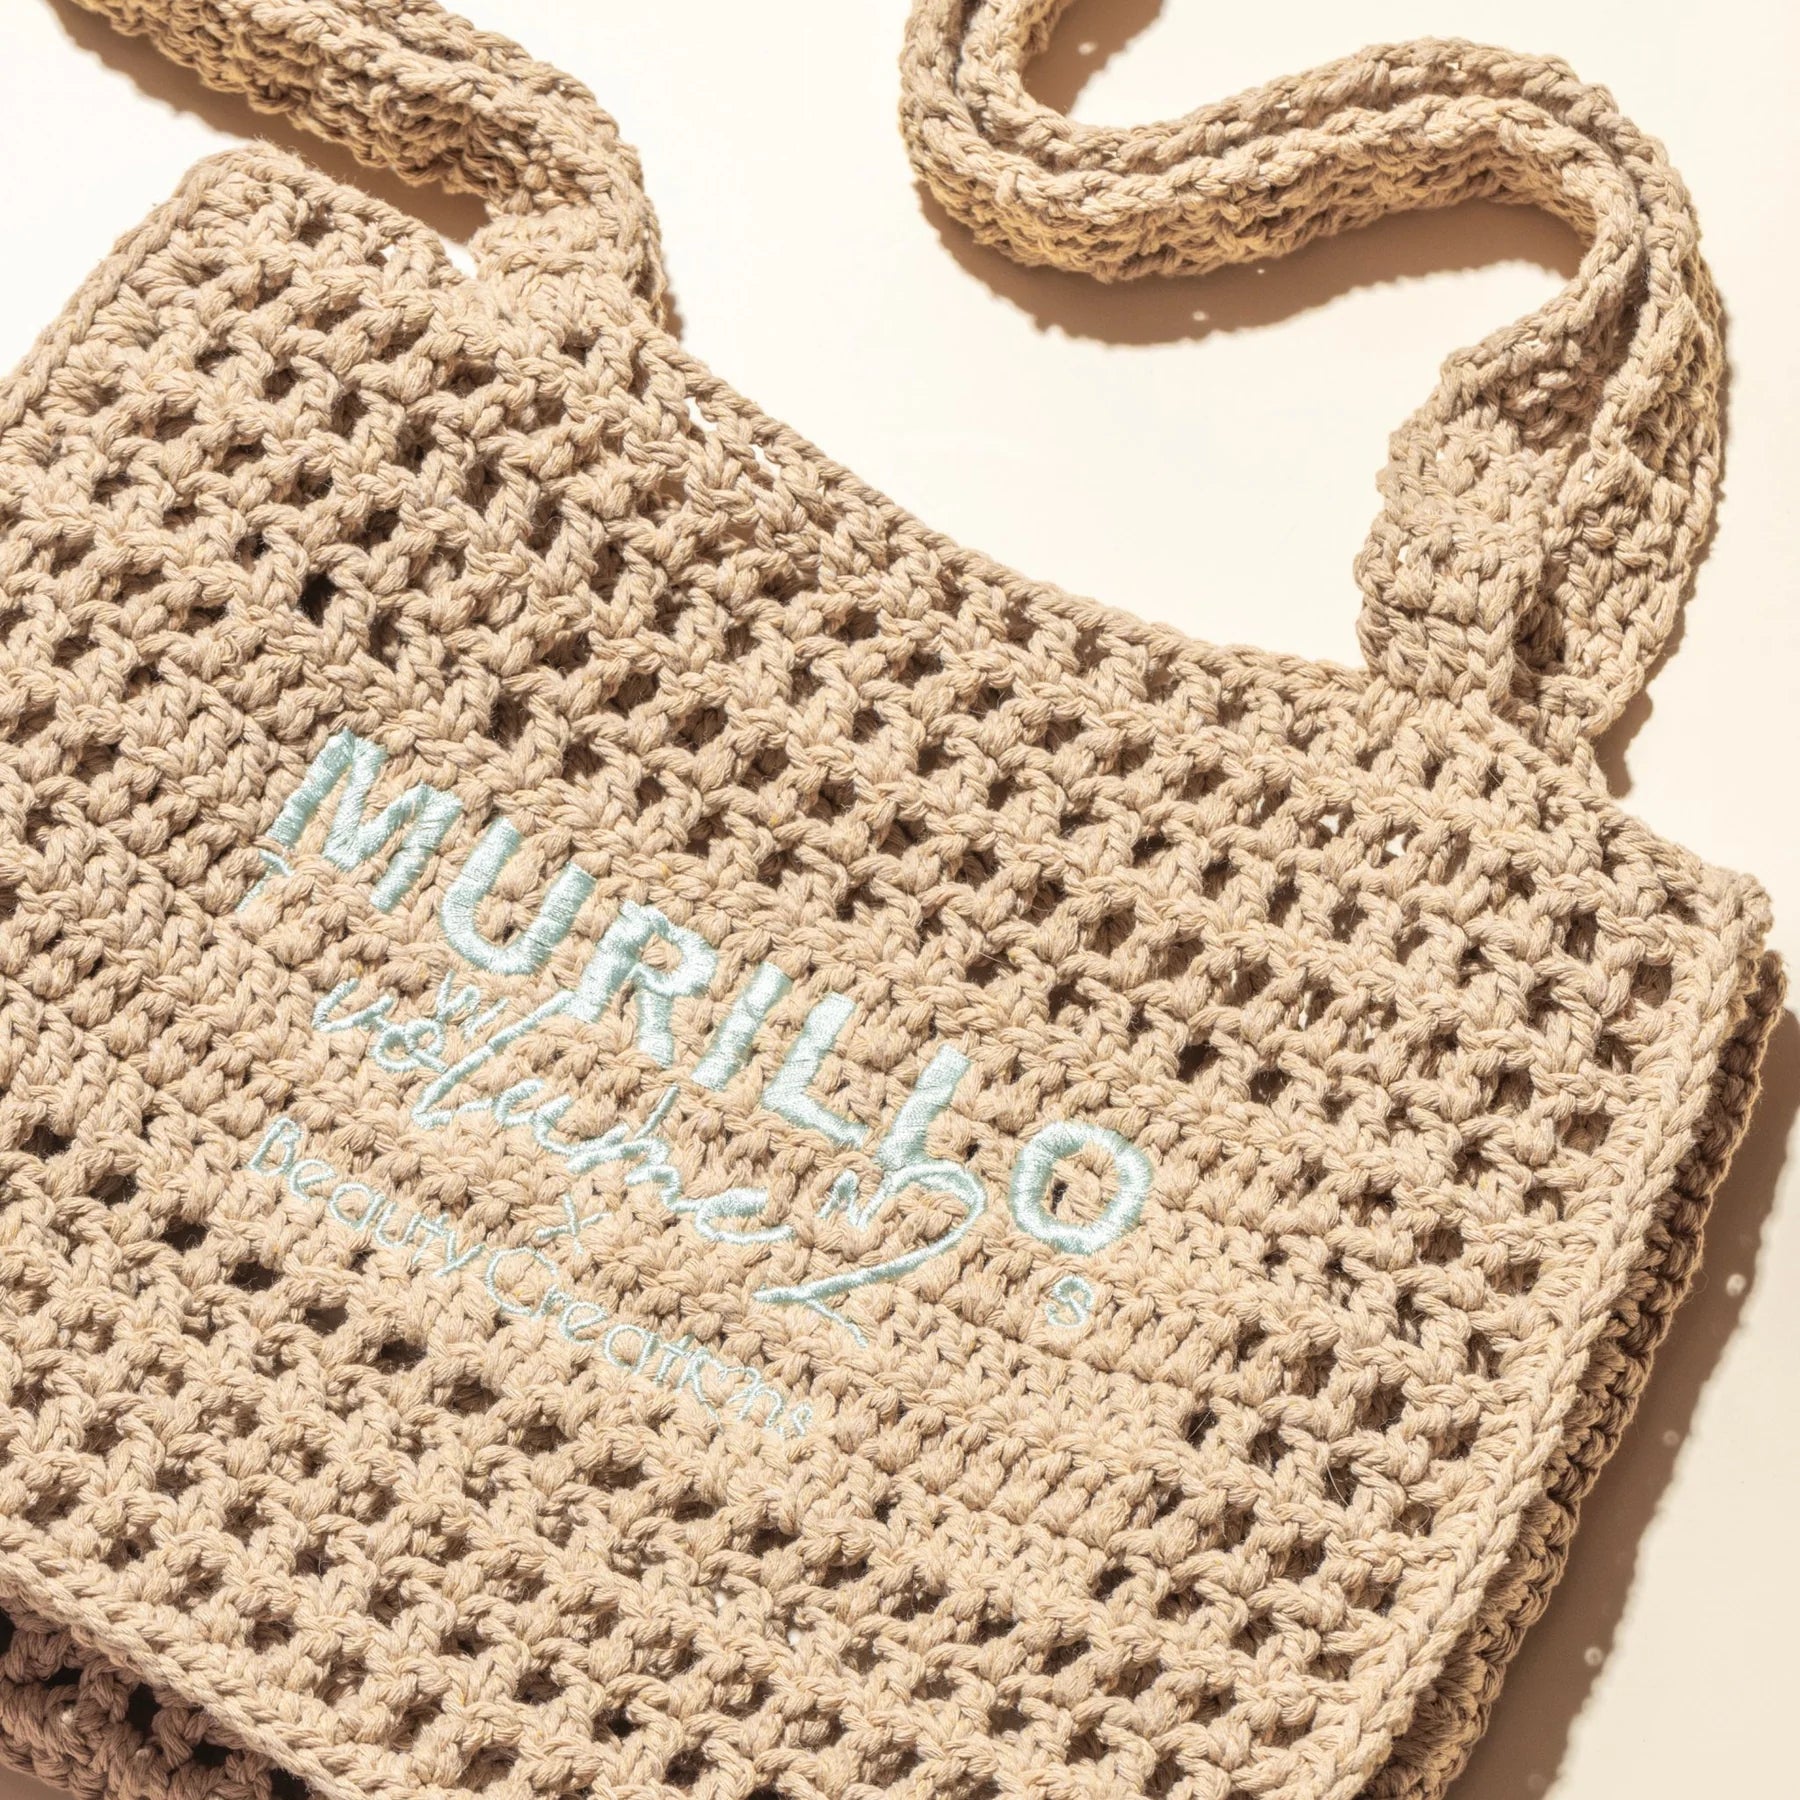 Beauty Creations - Murillo Twins Vol. 2 Woven Tote Bag